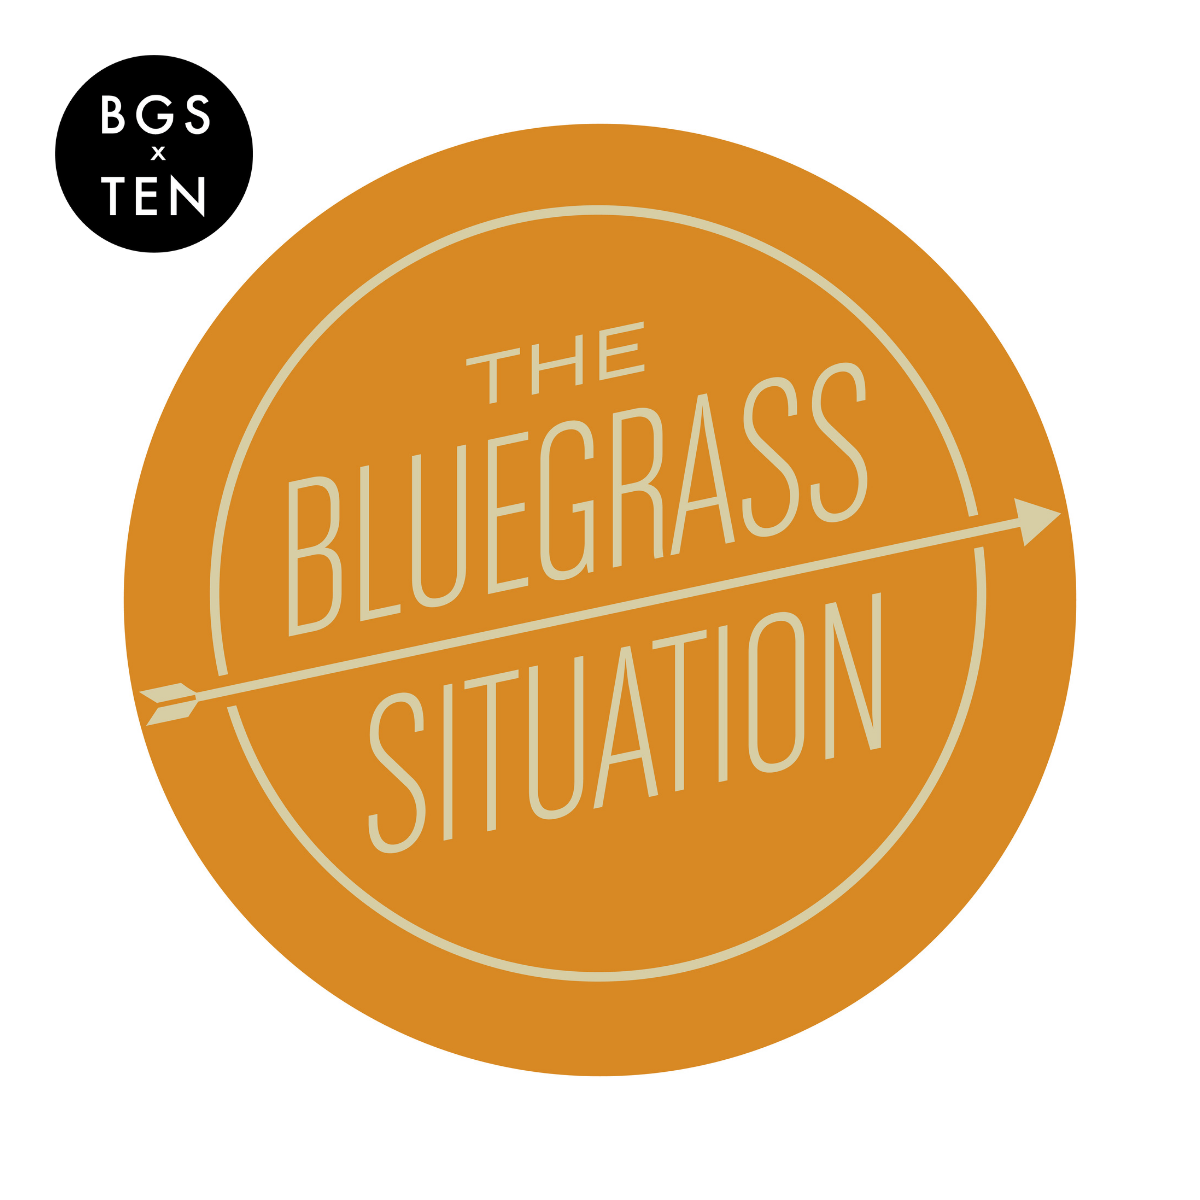 BGS10: We're Celebrating Ten Years of the Bluegrass Situation in 2022